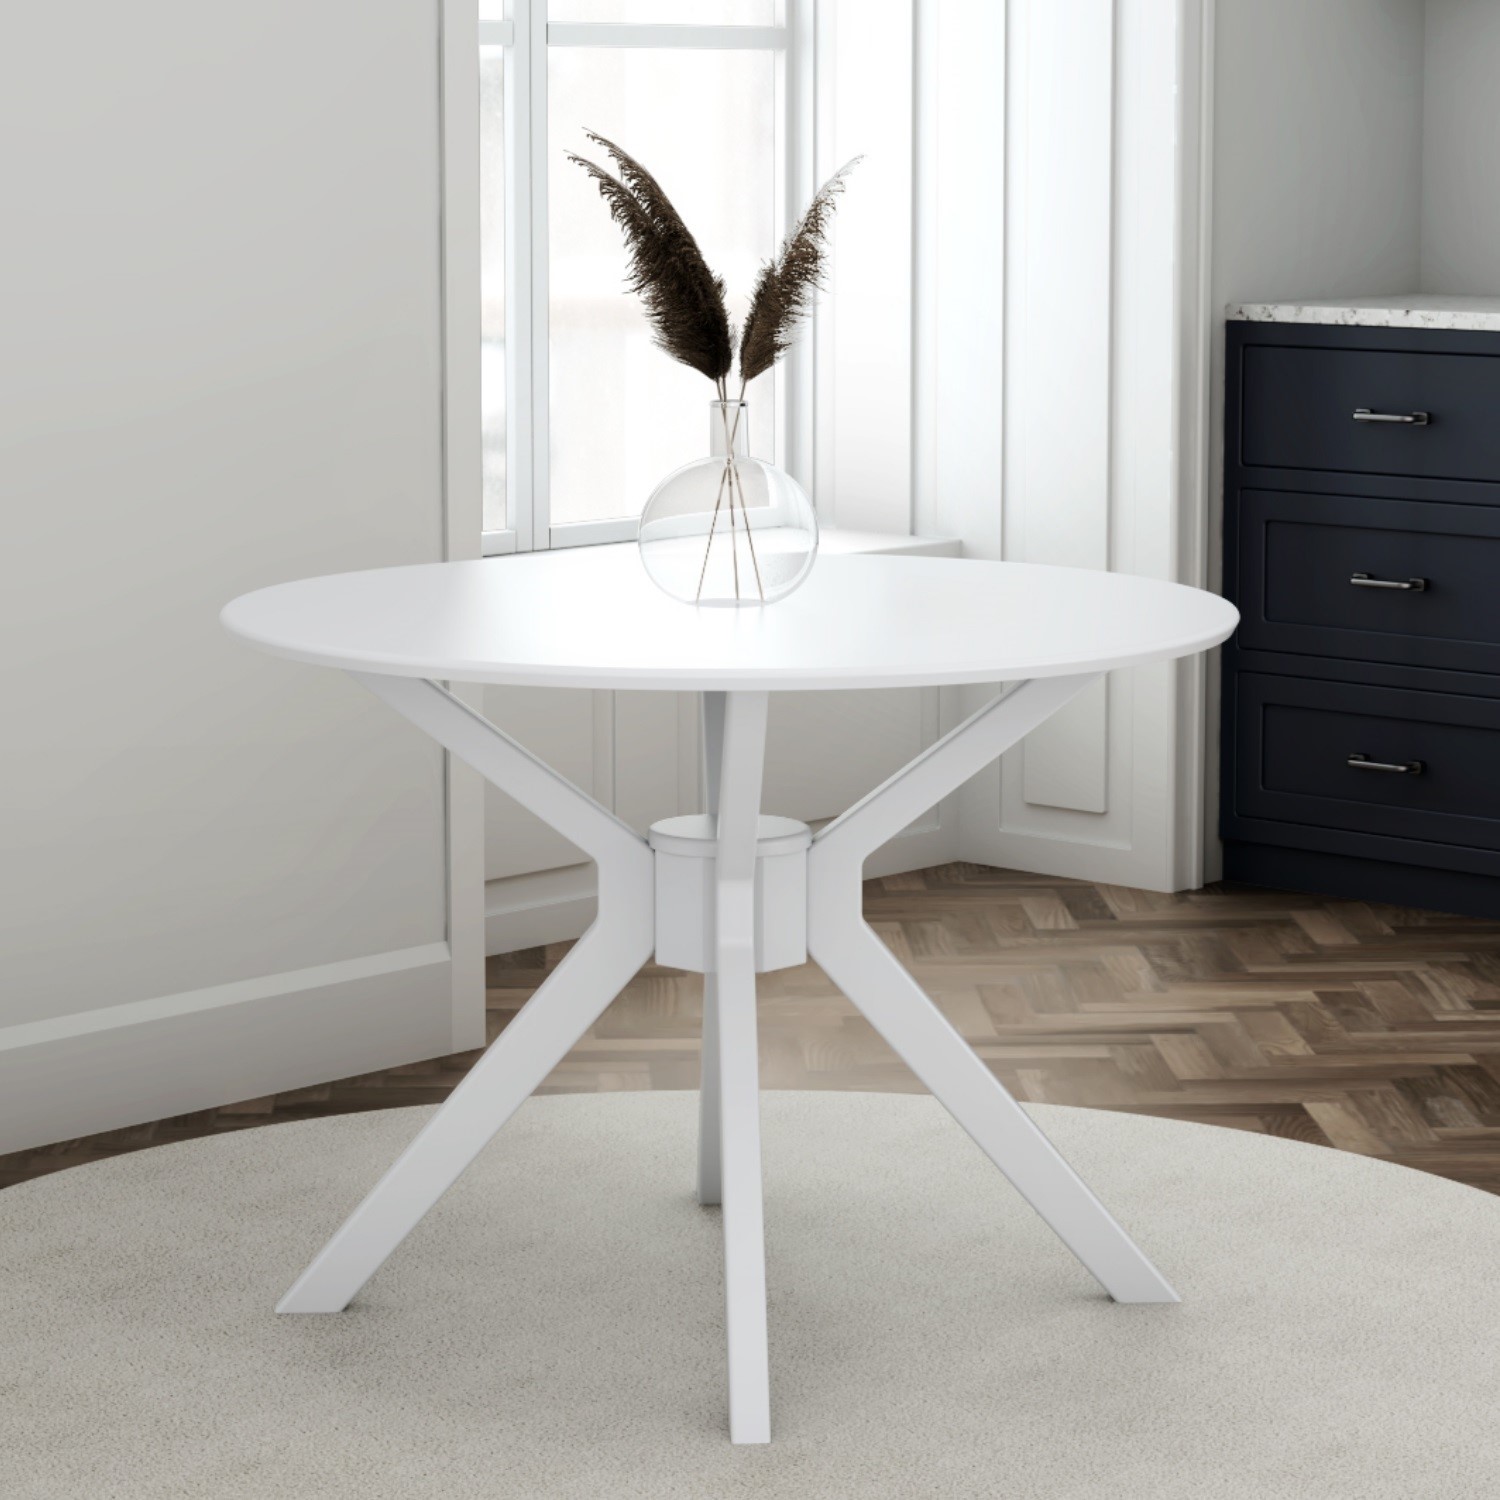 Round White Dining Table with Spider Legs - Seats 4 - Karie